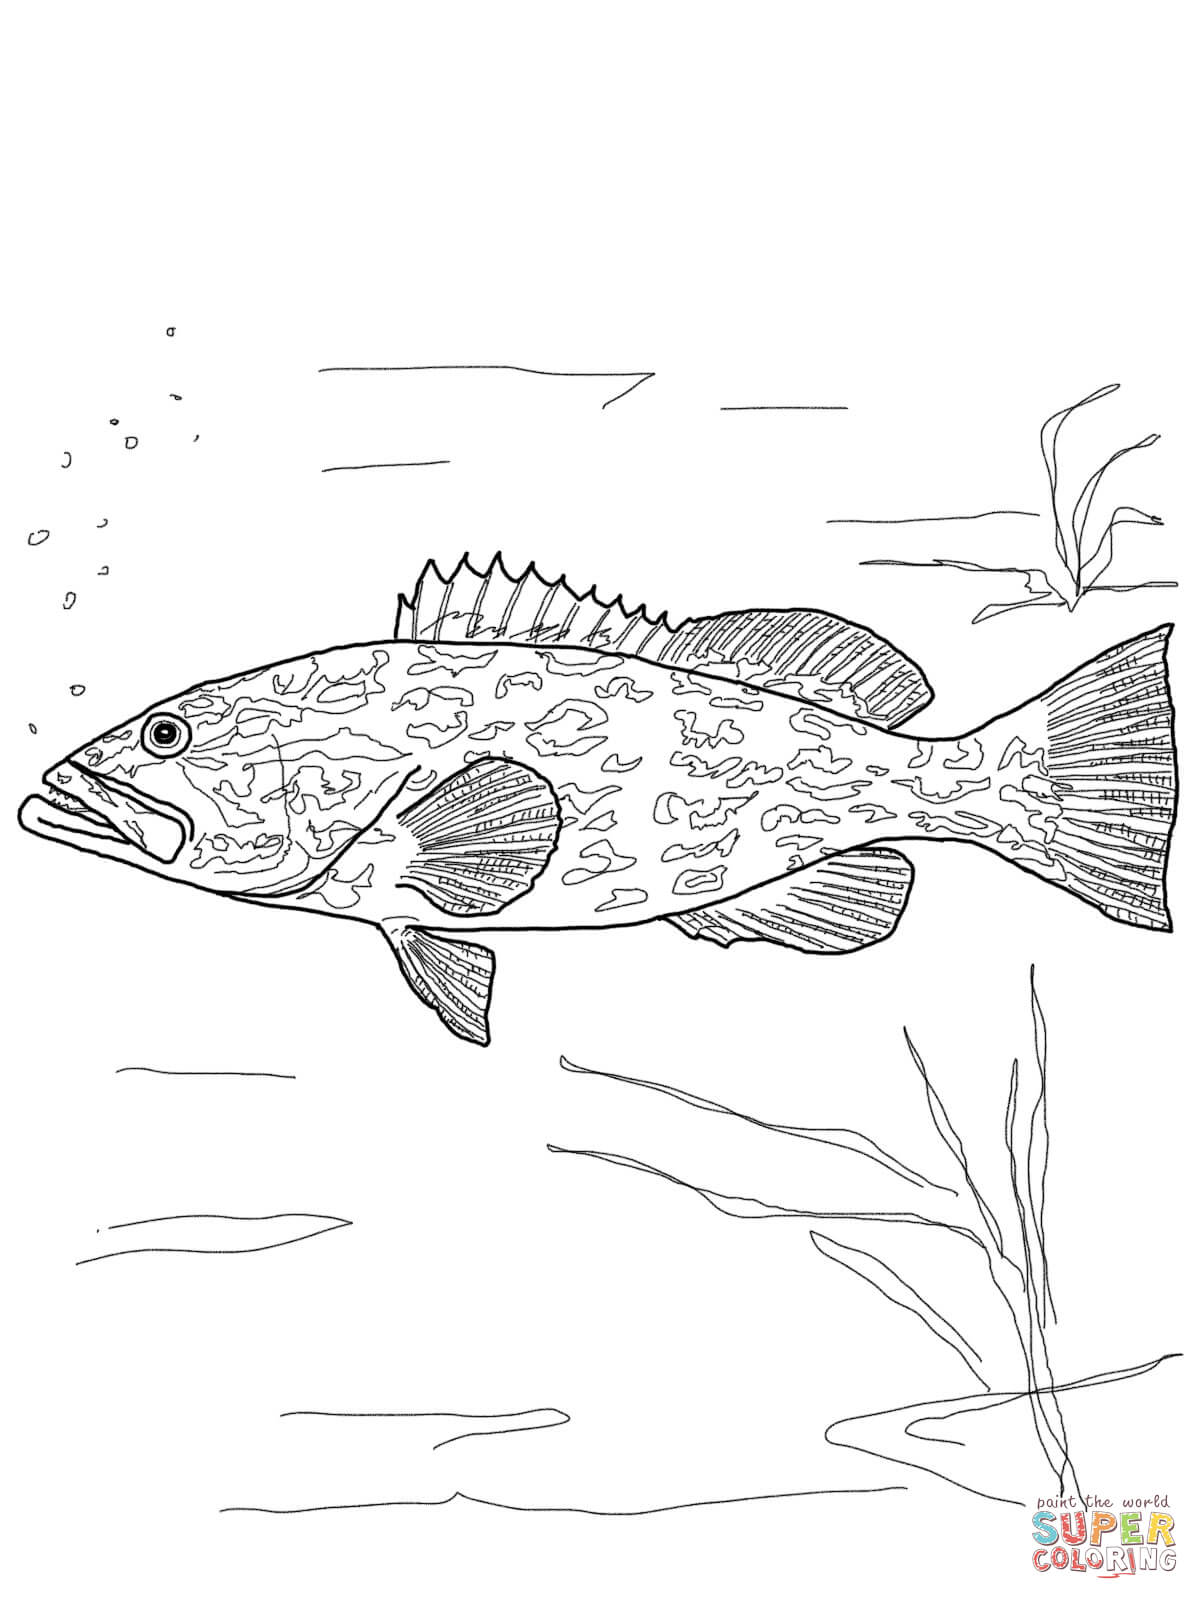 Grouper coloring #7, Download drawings